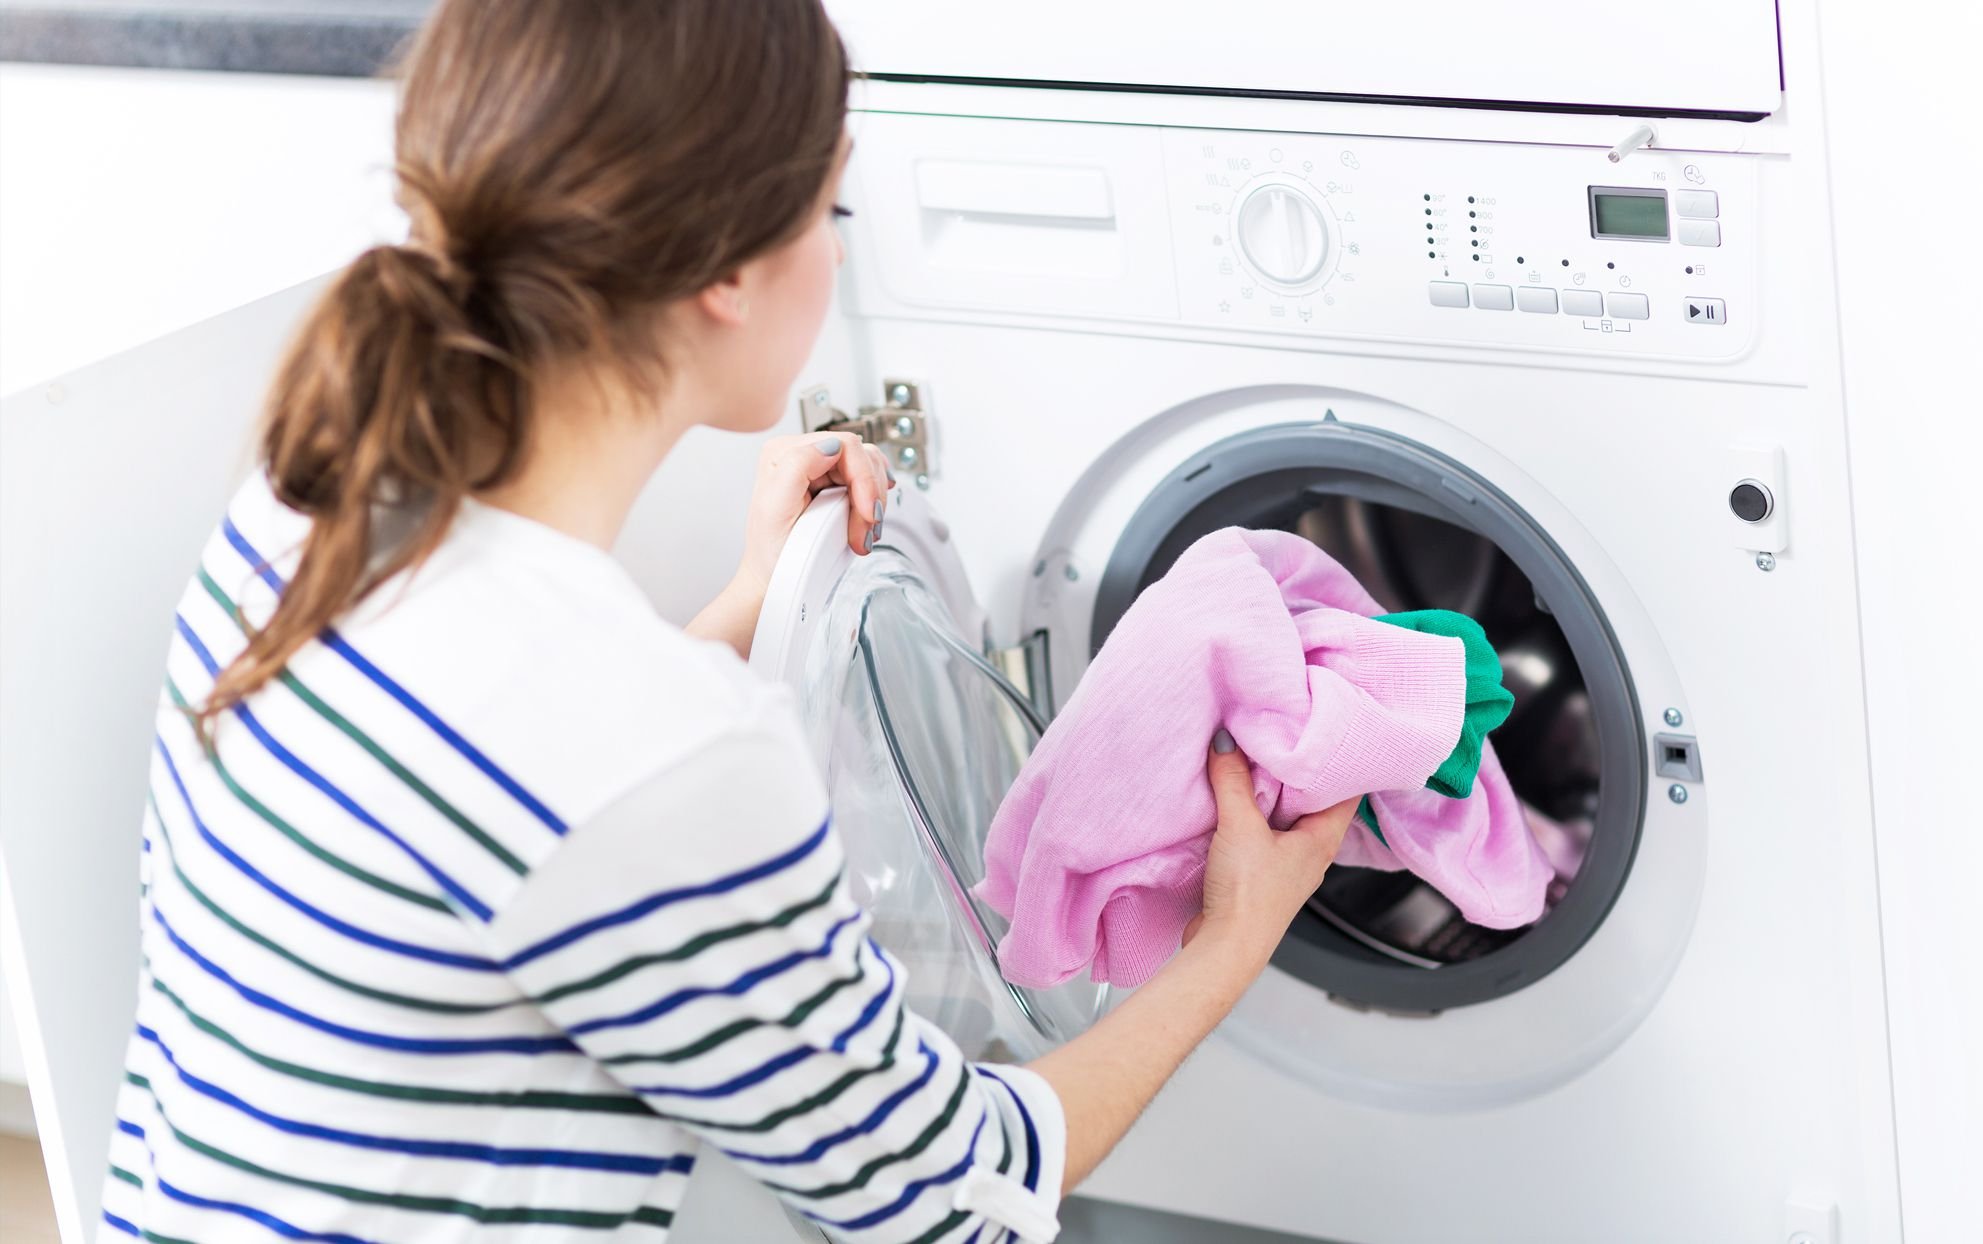 How Long Should Laundry Clothes Be Washed in Washing Machine